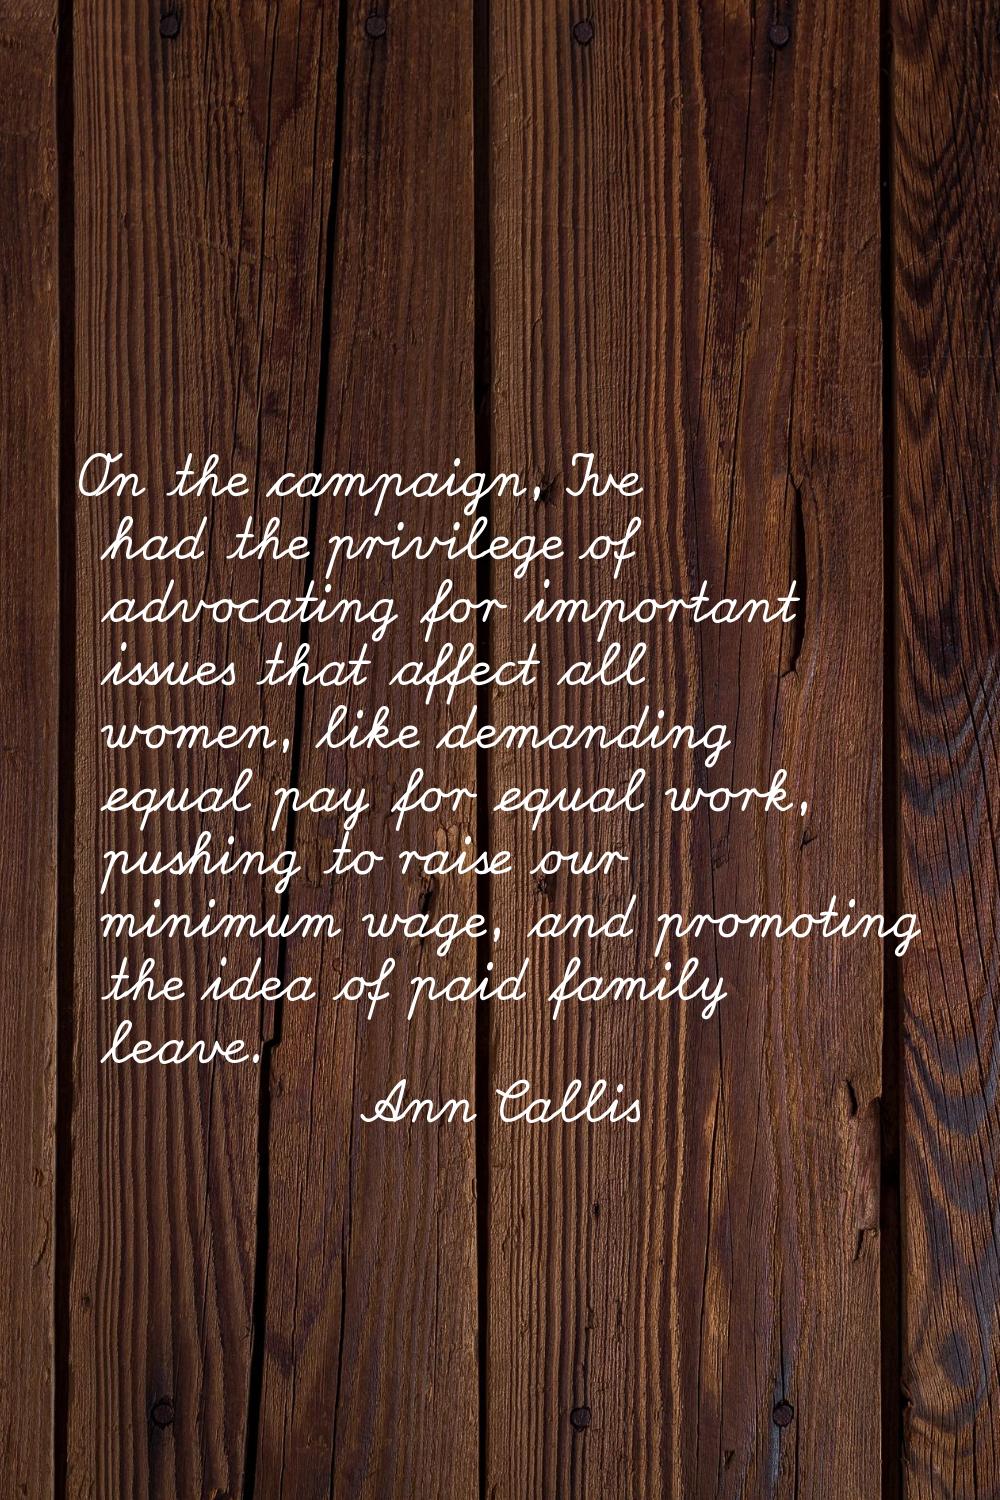 On the campaign, I've had the privilege of advocating for important issues that affect all women, l